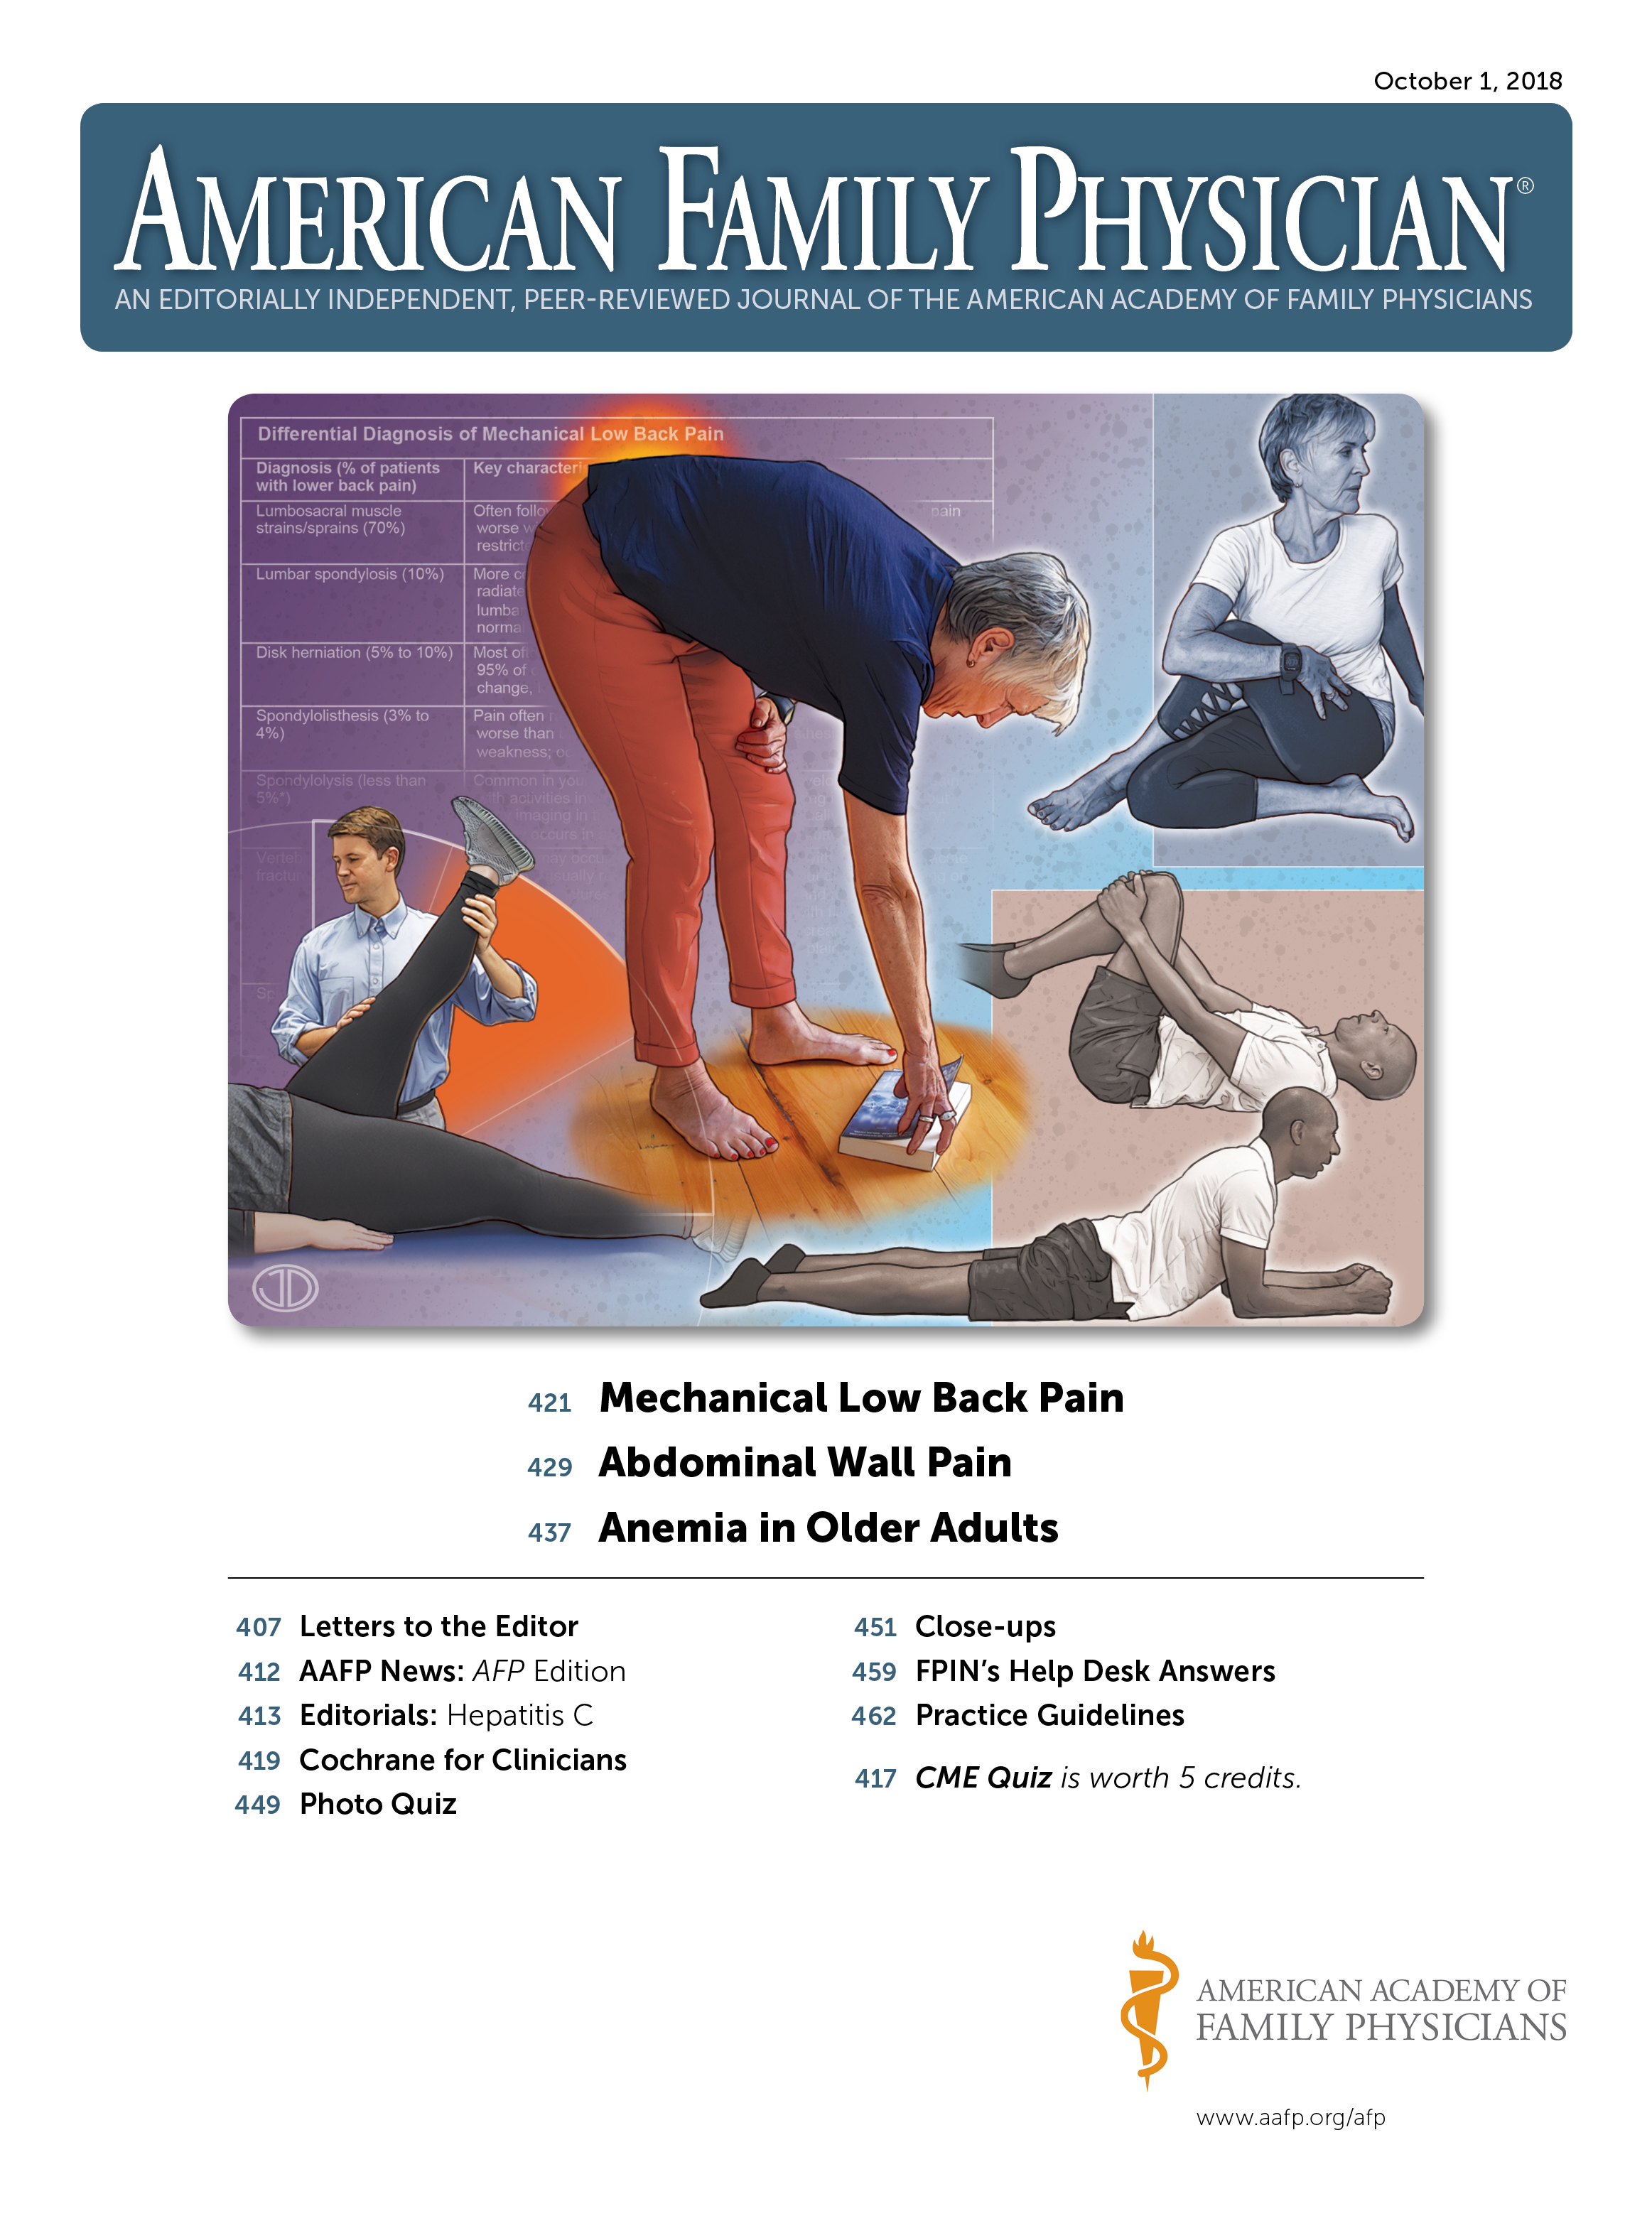 LOWER BACK - PAIN EXERCISE GUIDE One of the core messages